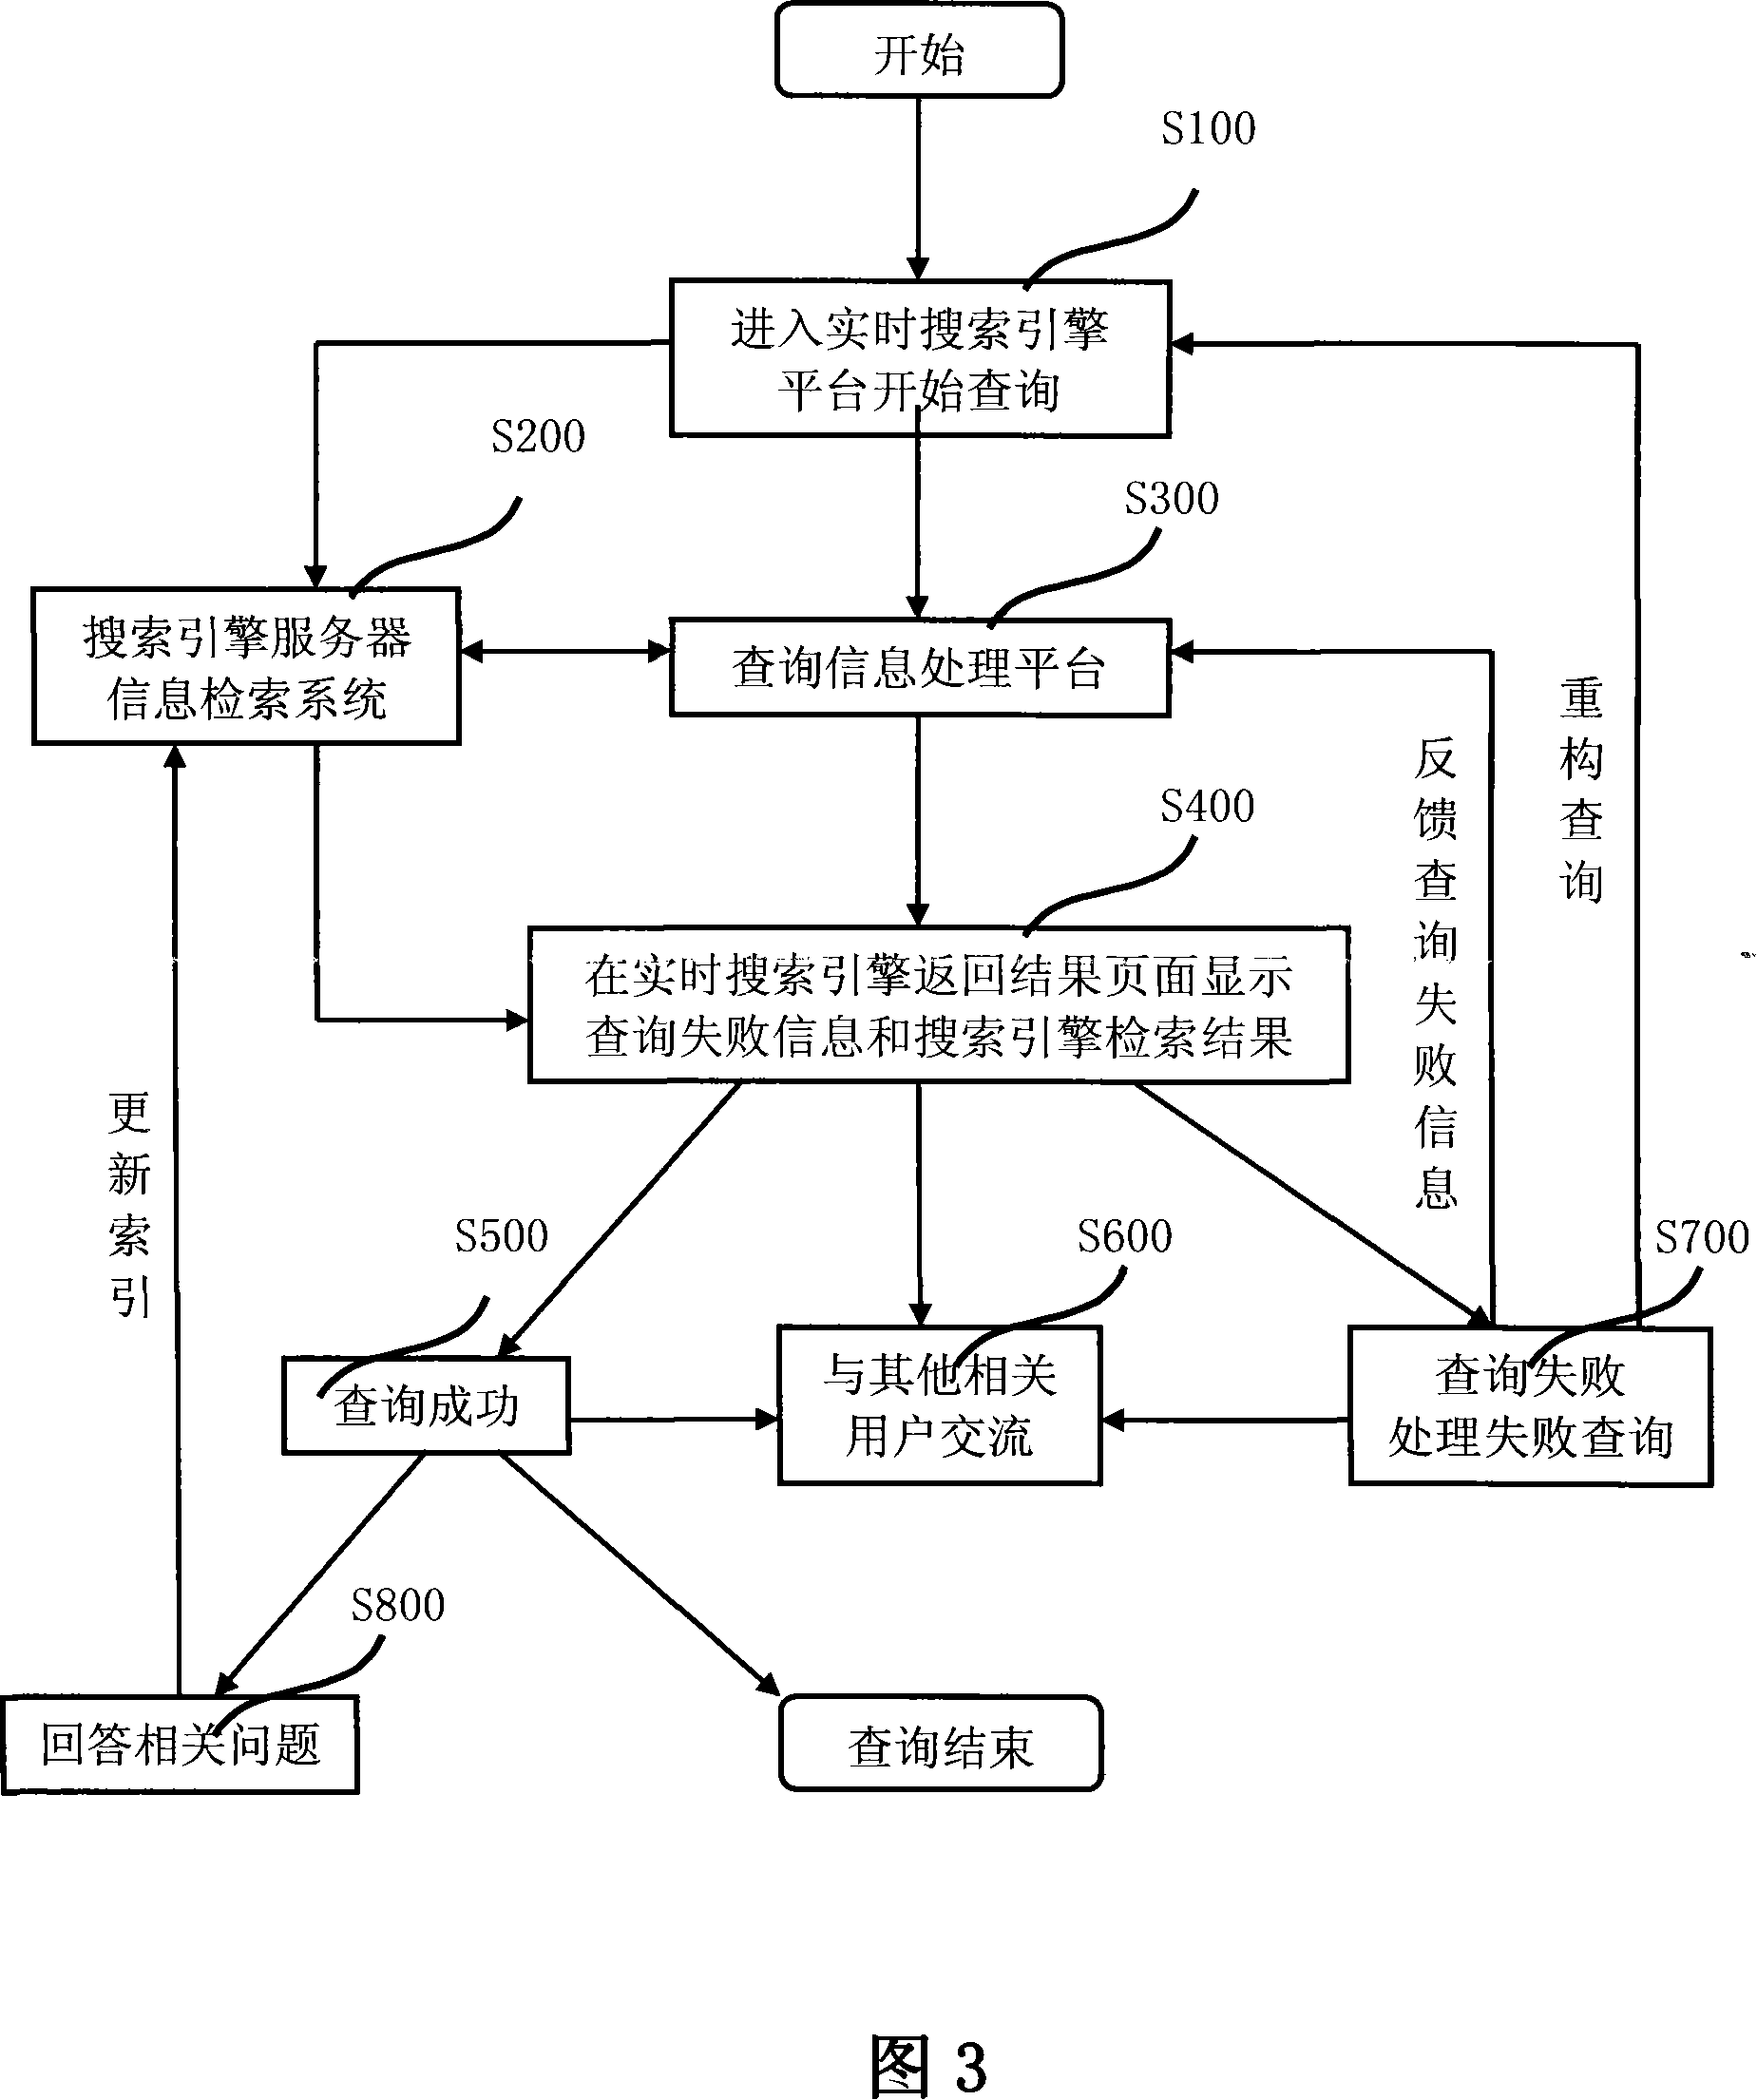 Interactive querying system and method